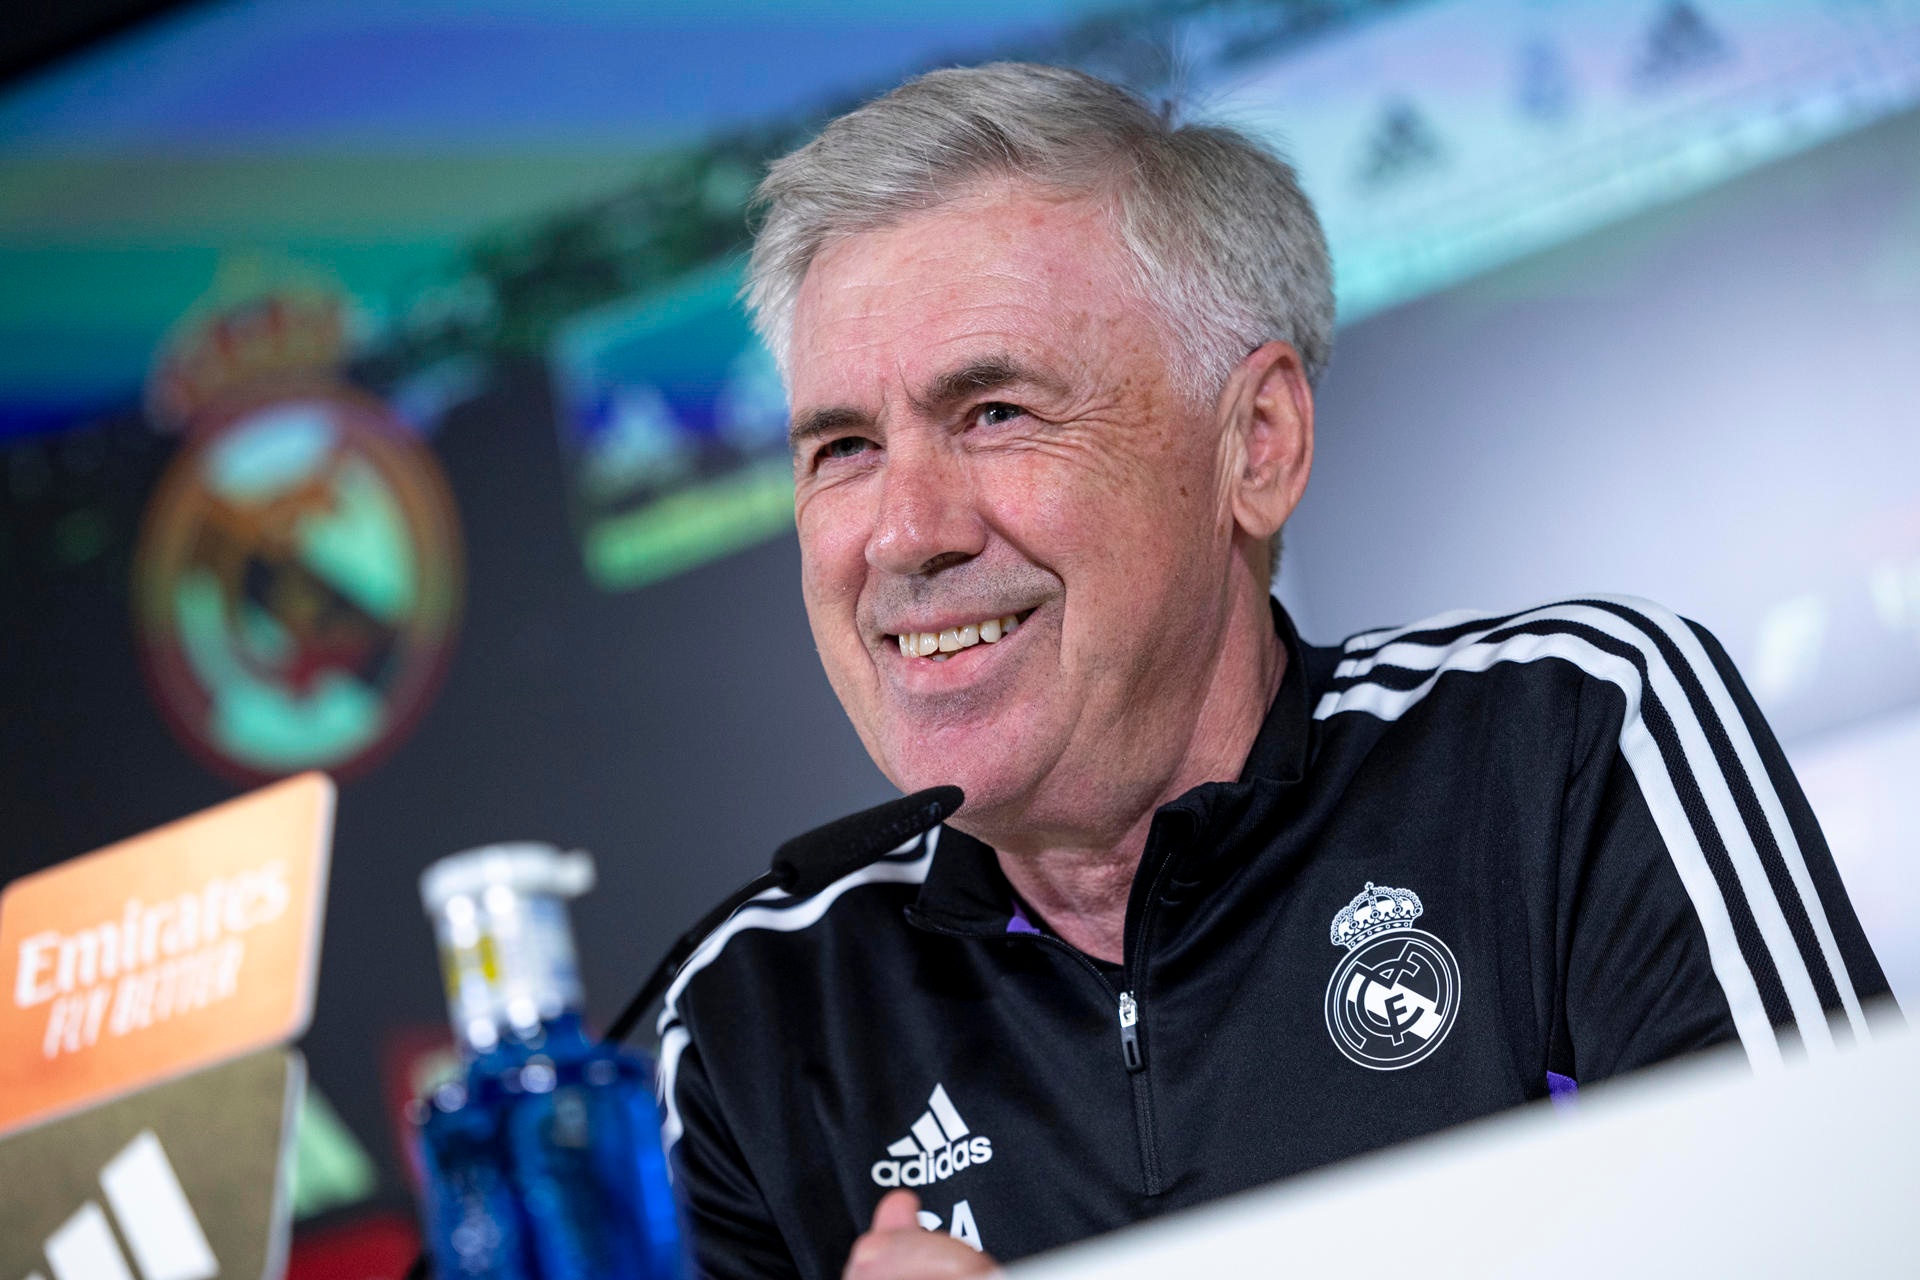 The Brazilian Football Federation (CBF) feel there is no doubt that Real Madrid coach, Carlo Ancelotti, will become head coach of their national team, according to 'Globo'. He will take charge of the team in 2024, but it's unclear whether that will be in January or June. The president of the CBF, Ednaldo Rodrigues, aims to announce it by the end of the month.